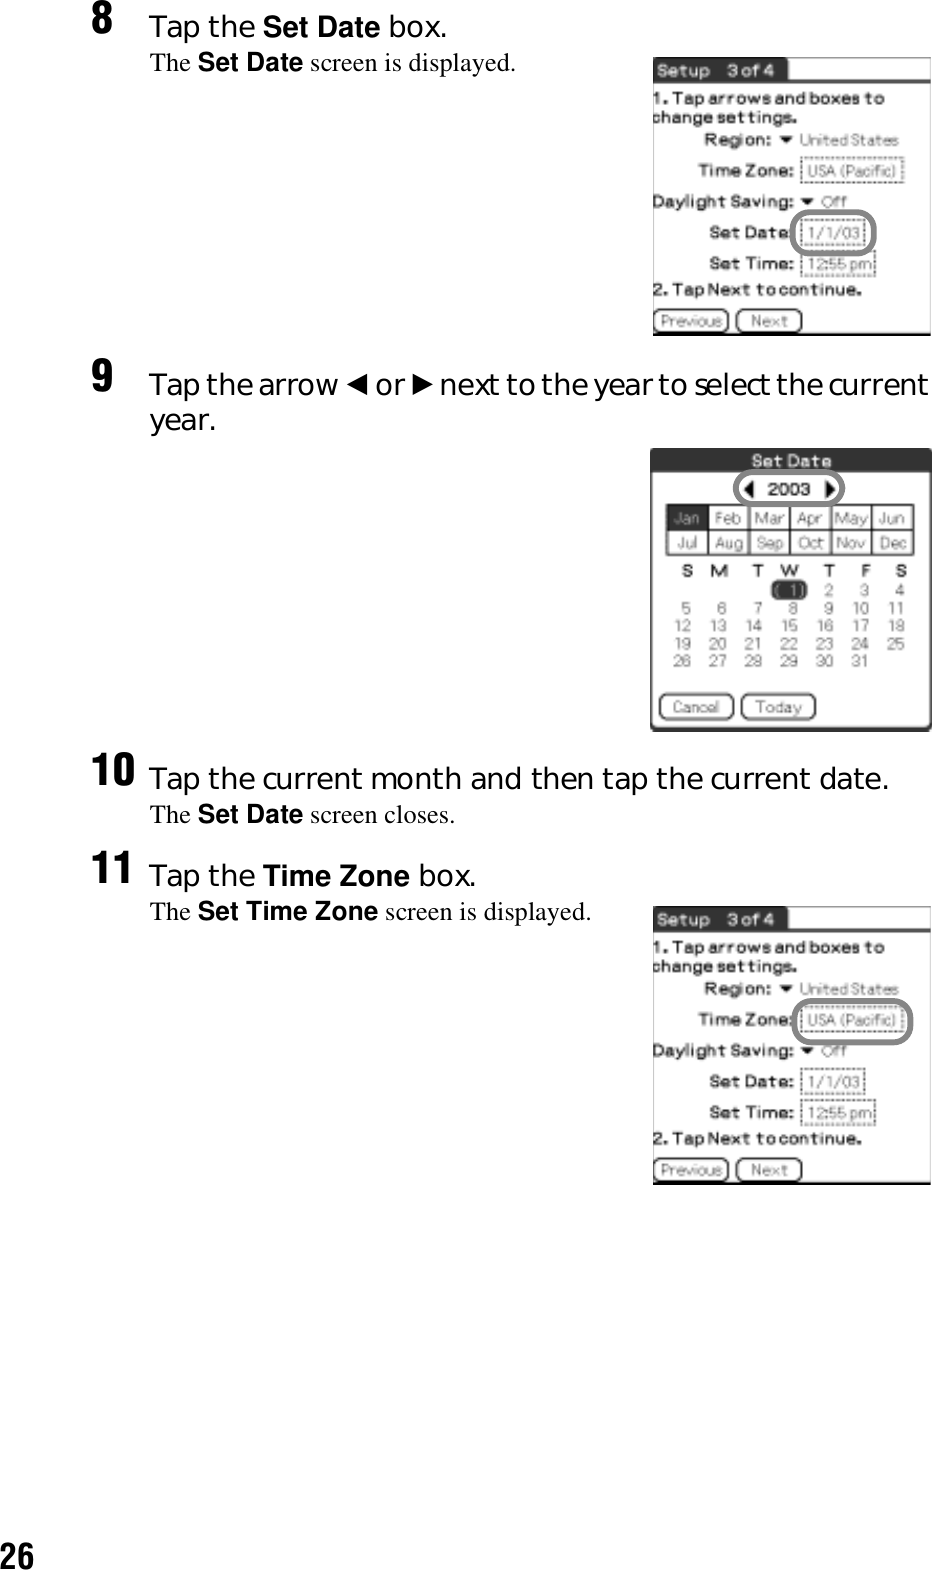 268Tap the Set Date box.The Set Date screen is displayed.9Tap the arrow b or B next to the year to select the current year.10 Tap the current month and then tap the current date.The Set Date screen closes.11 Tap the Time Zone box.The Set Time Zone screen is displayed.